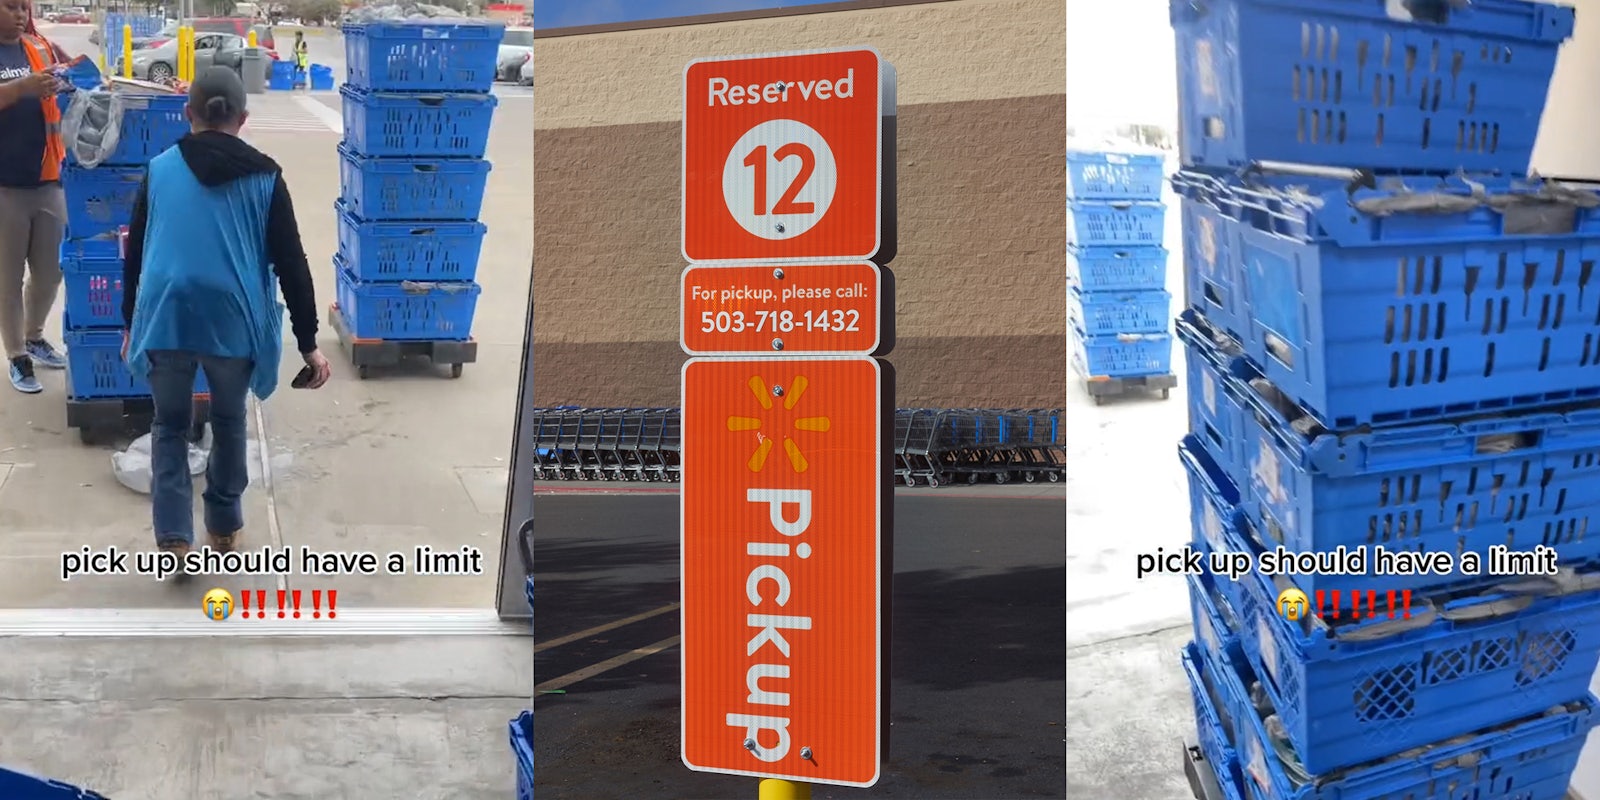 Walmart employees with blue pickup bins and caption 'pick up should have a limit' (l) Walmart reserved parking for Pickup orders sign (c) Walmart blue pickup bins and caption 'pick up should have a limit' (r)